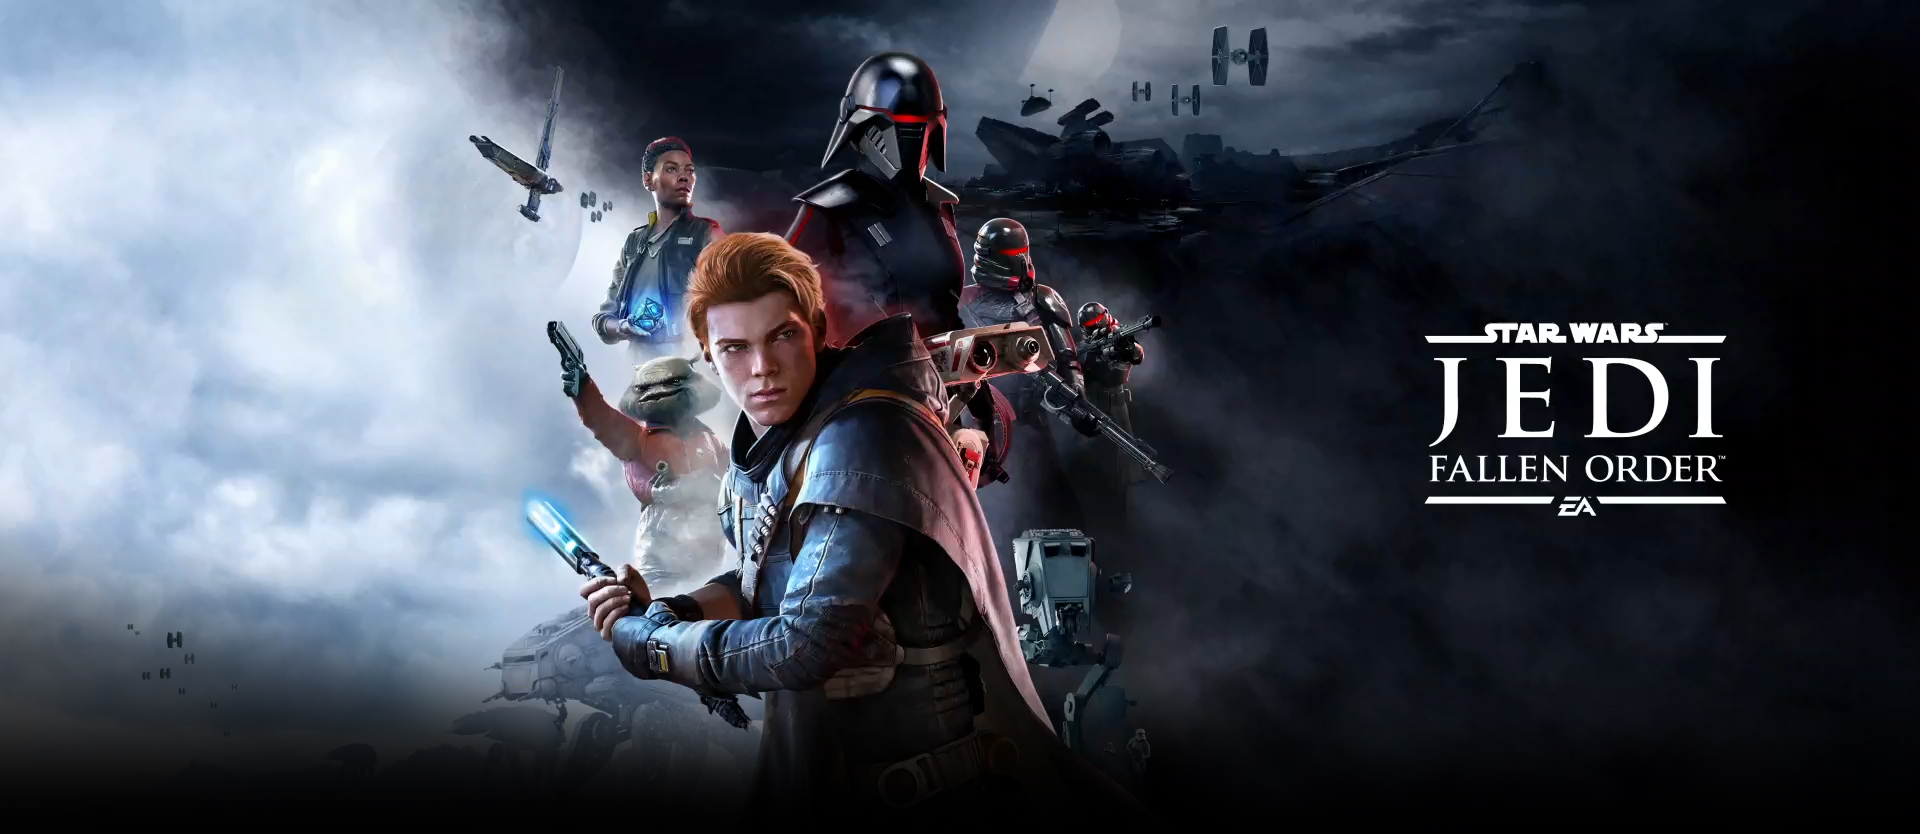 Star Wars Jedi Fallen Order Video Game Review Family Video Game